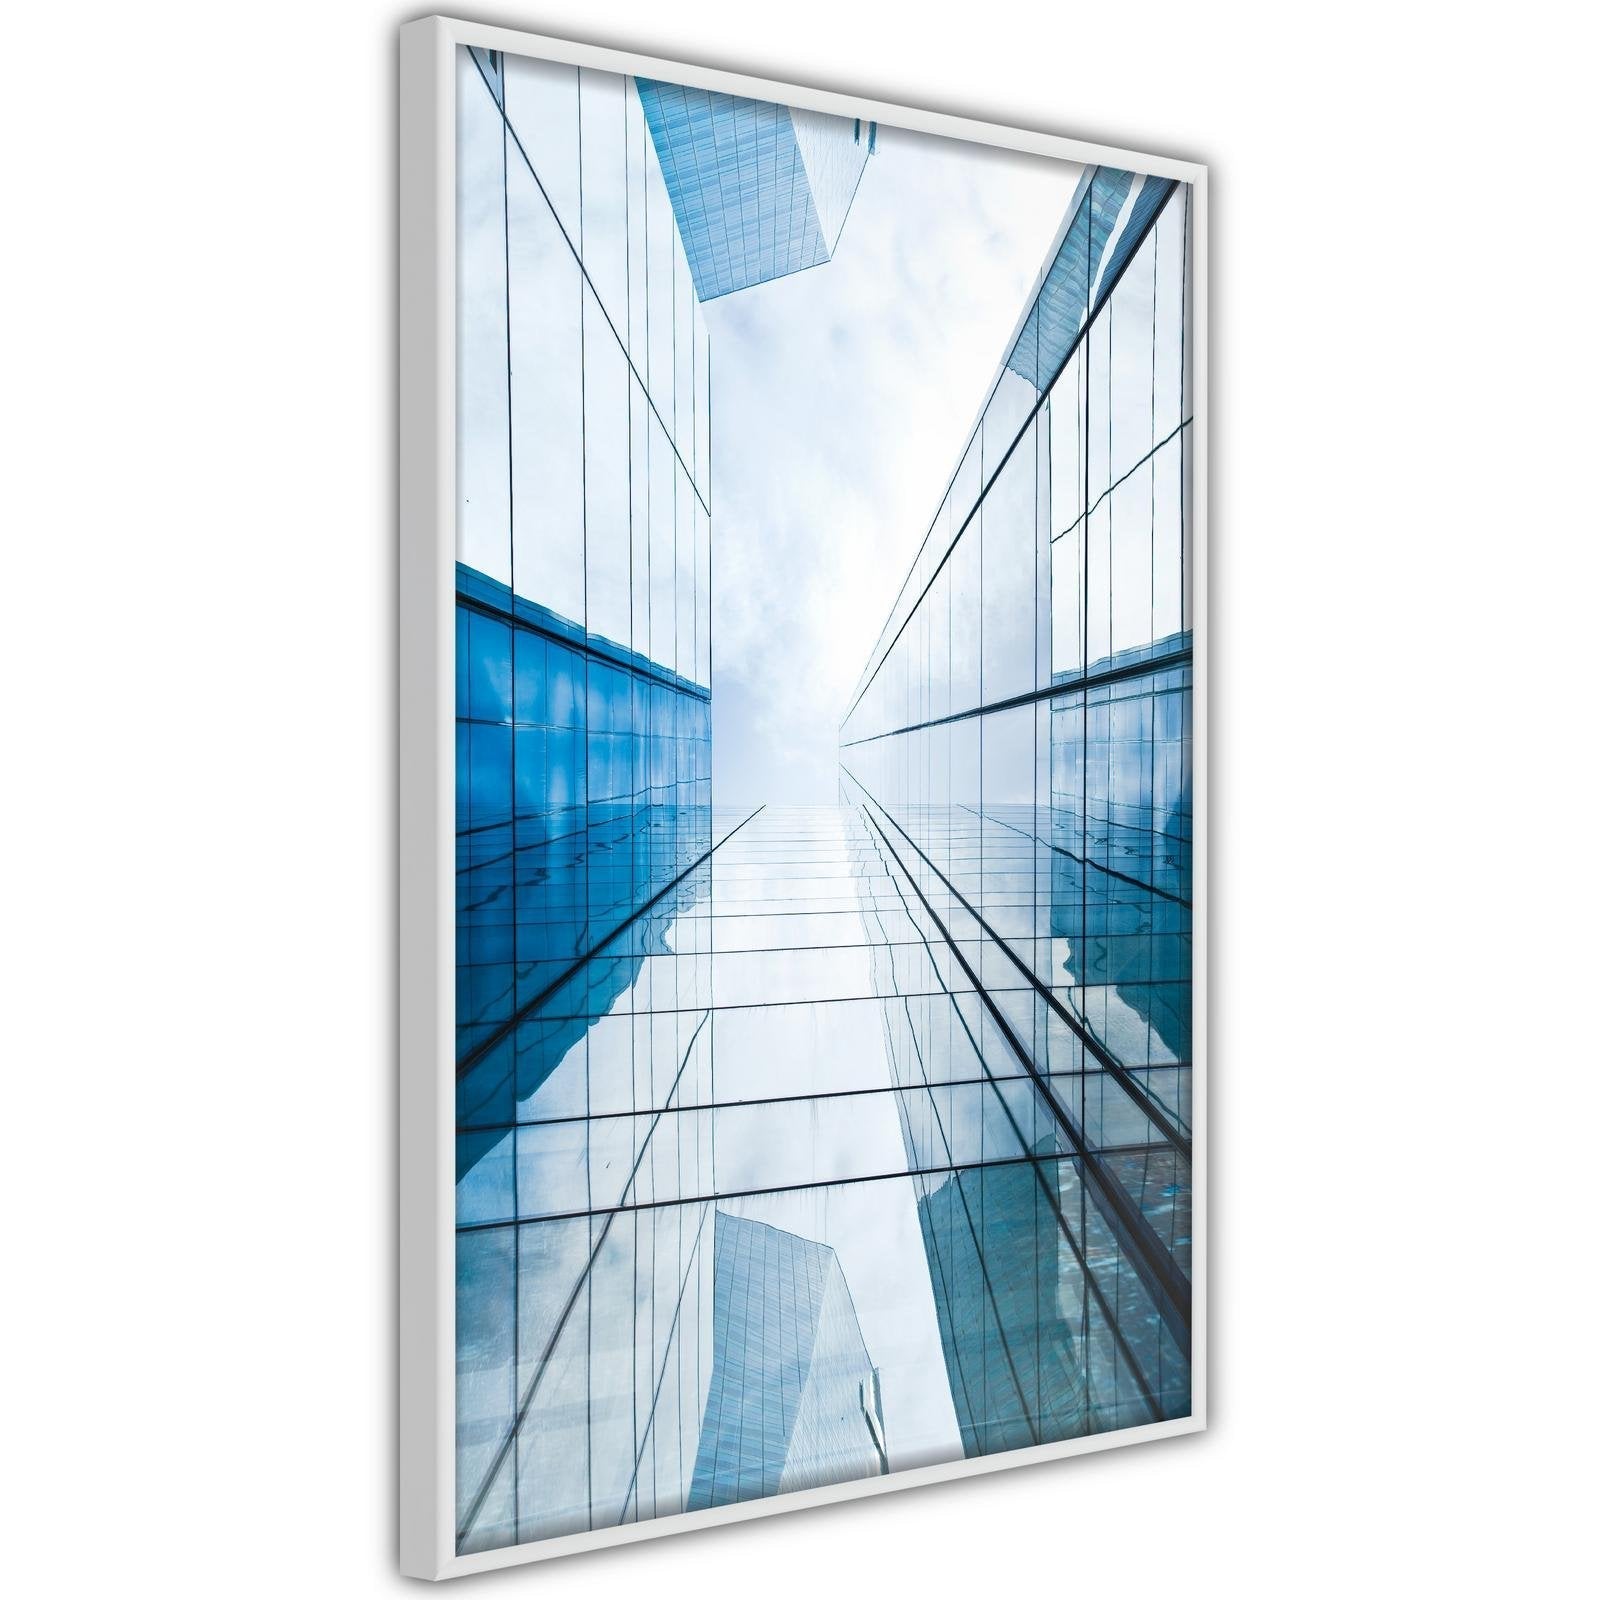 Inramad Poster / Tavla - Steel and Glass (Blue)-Poster Inramad-Artgeist-peaceofhome.se